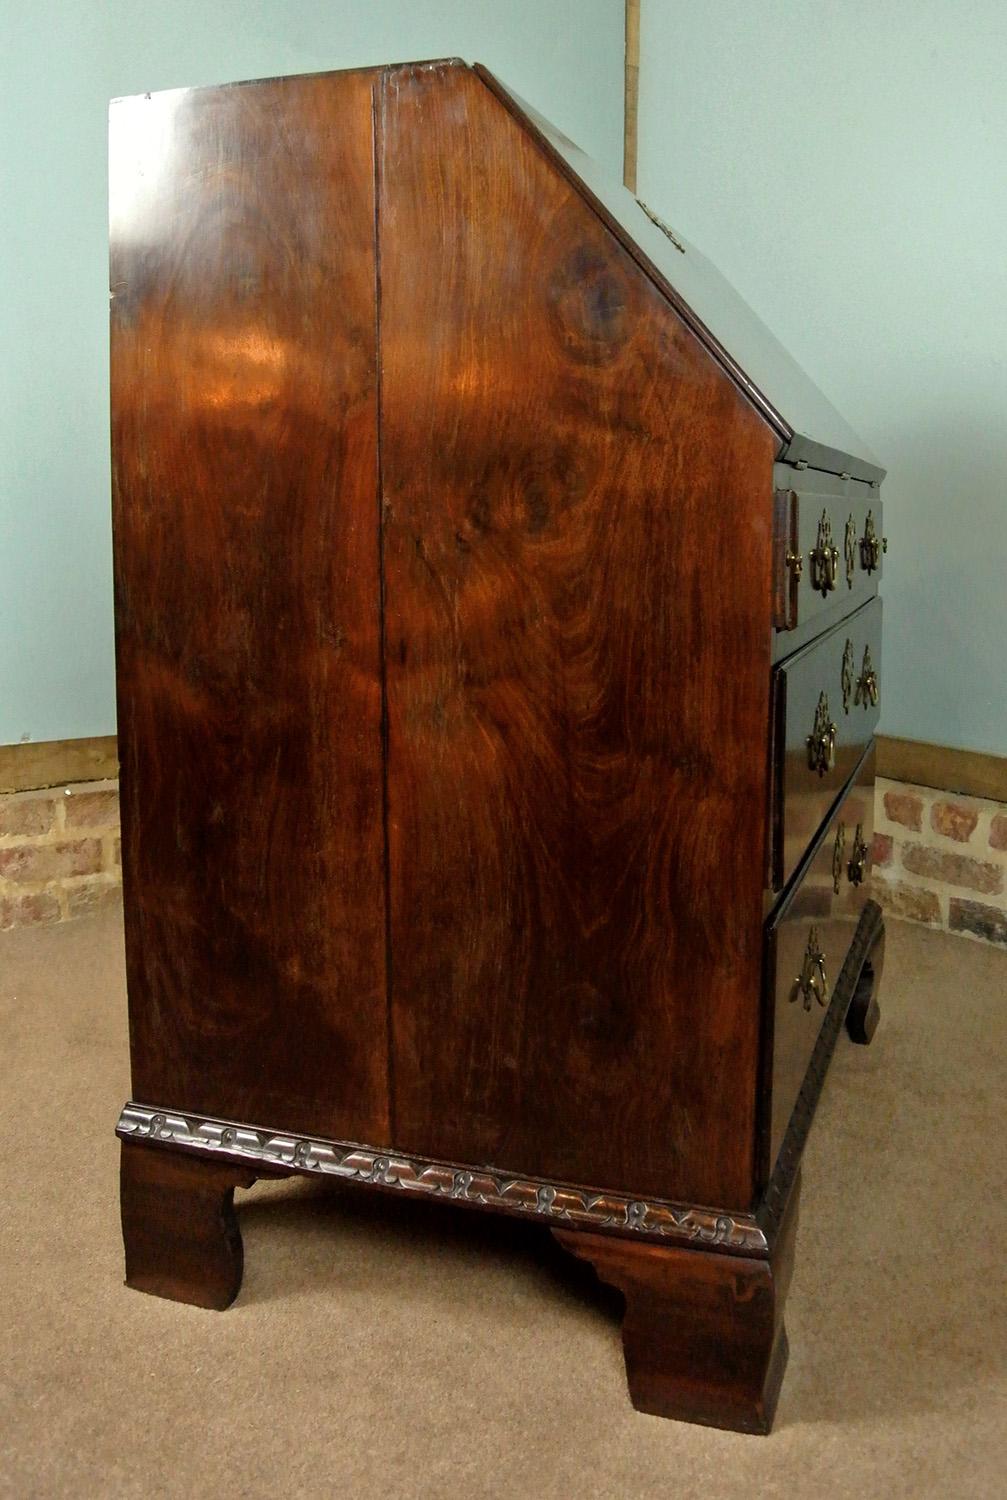 Exceptional Rare and Fine Padouk Wood Bureau in the Chippendale Manner, c. 1780 For Sale 5